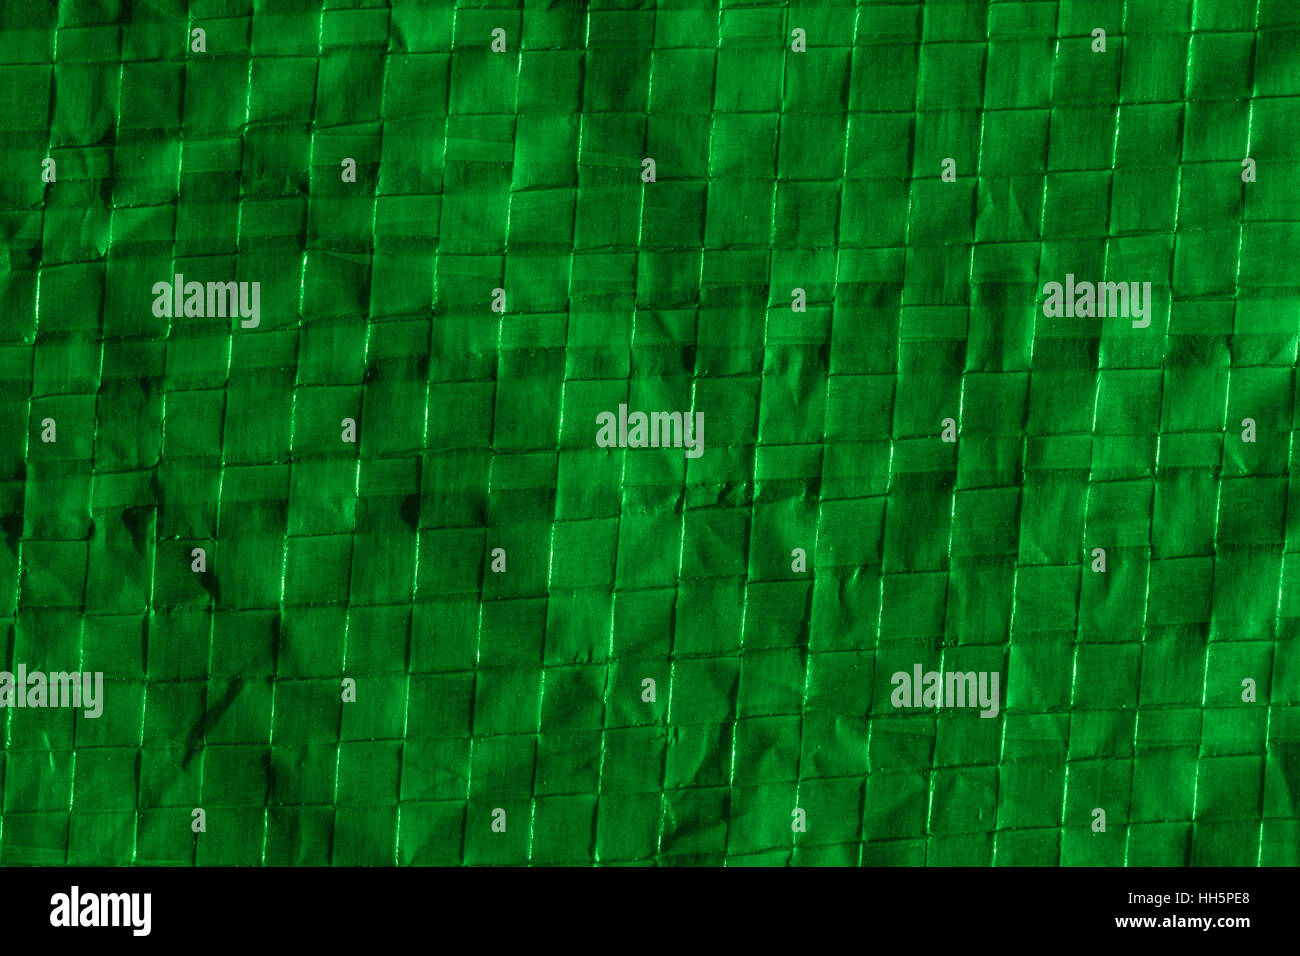 Abstract macro photo of section of green lit polymer ground sheet / tarpaulin used for camping. Almost looks like bamboo. Protective layer metaphor. Stock Photo